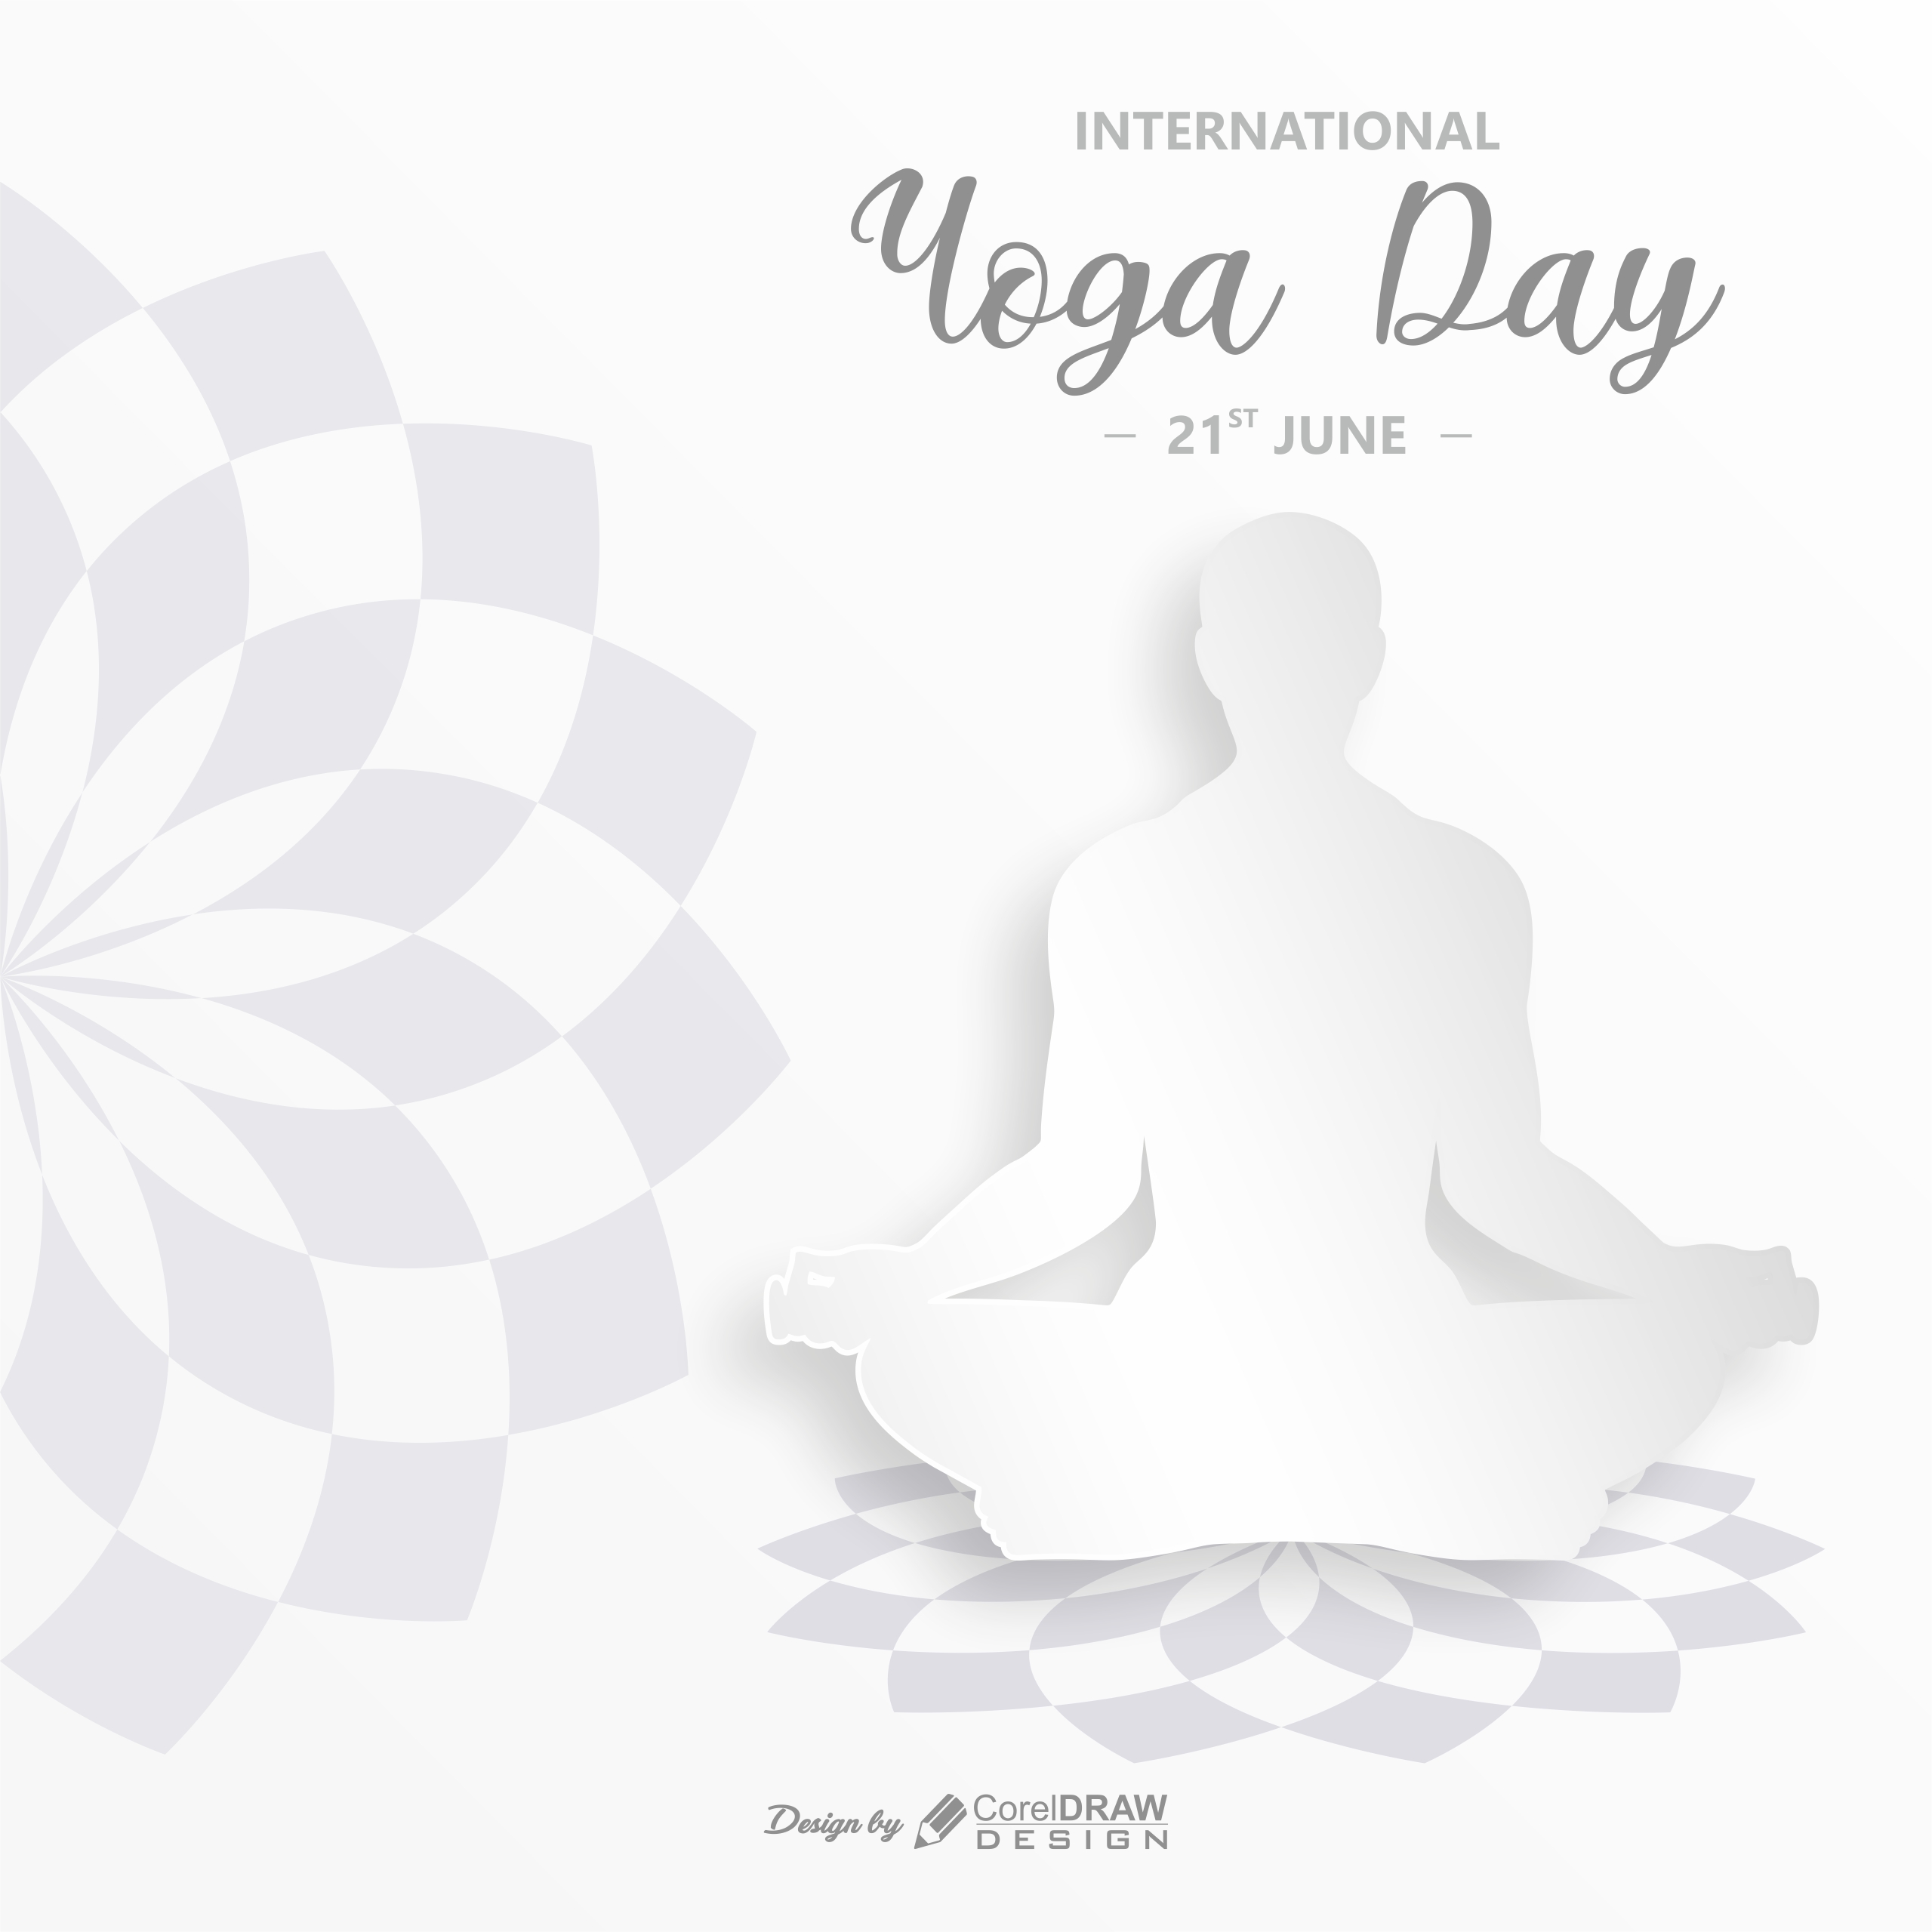 International Yoga Day-White 3D Paper style